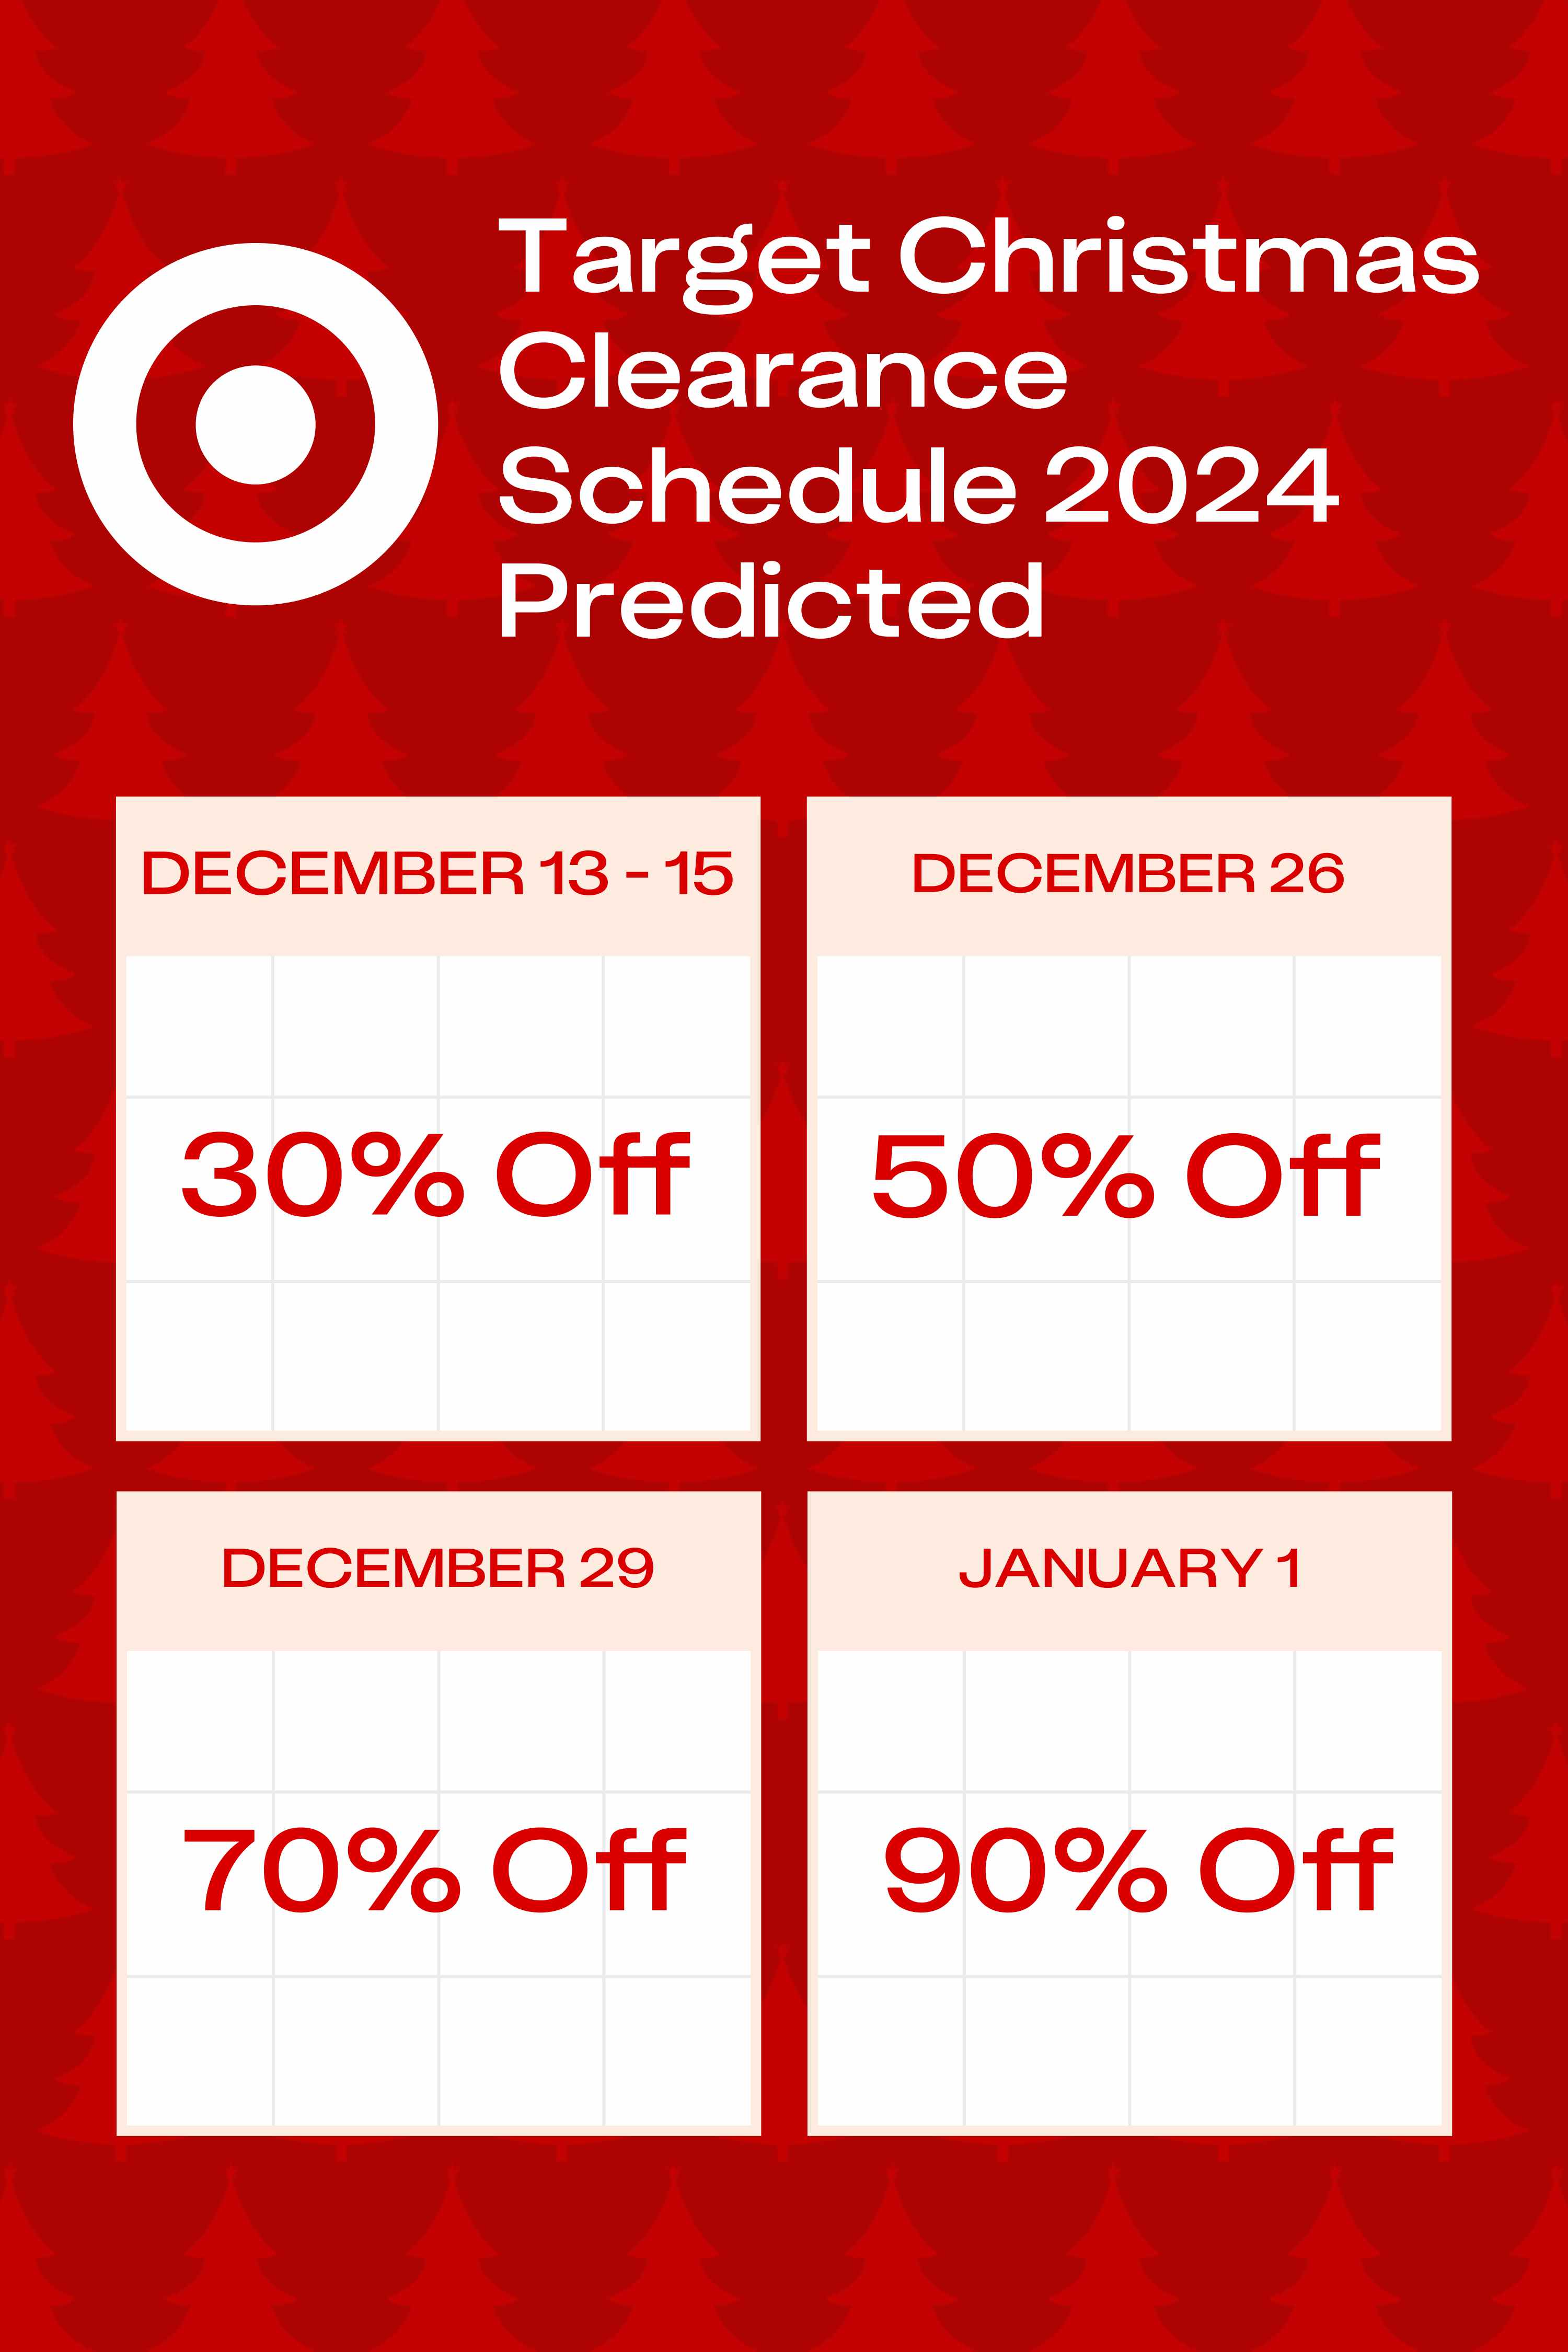 Target Christmas Clearance Schedule 2024 predicted